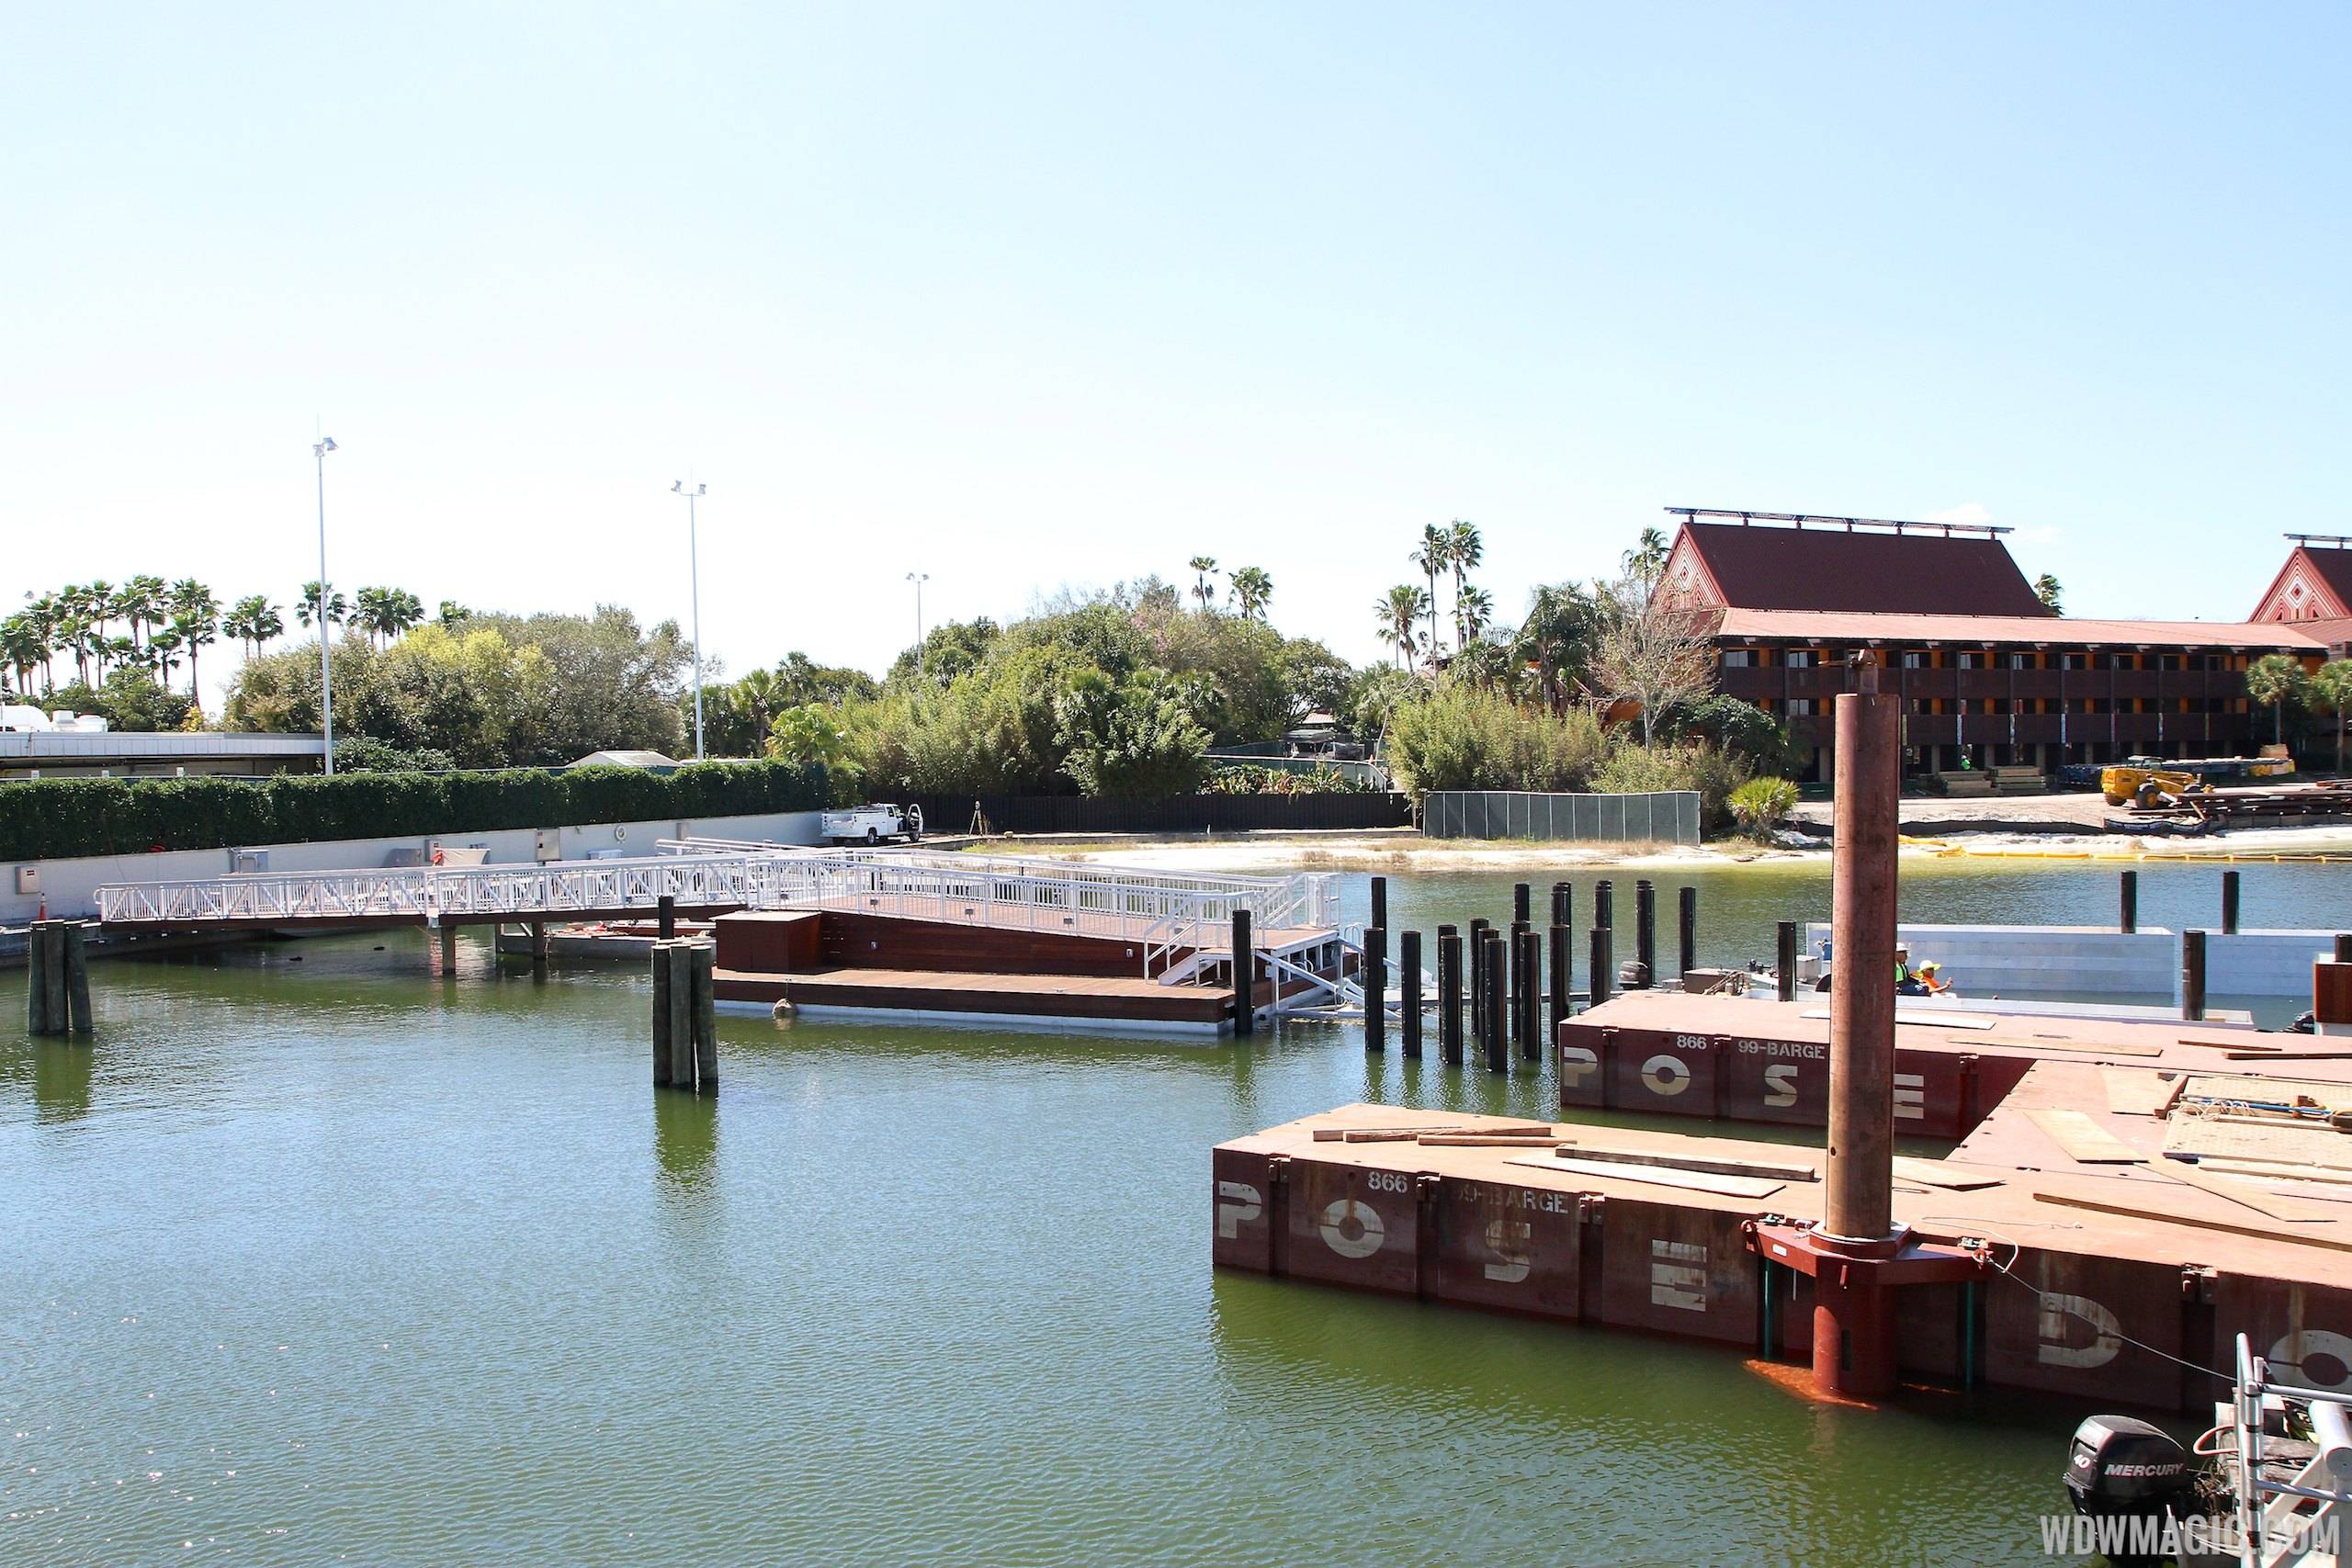 PHOTOS - Latest progress on the second ferry boat dock at the Transportation and Ticket Center